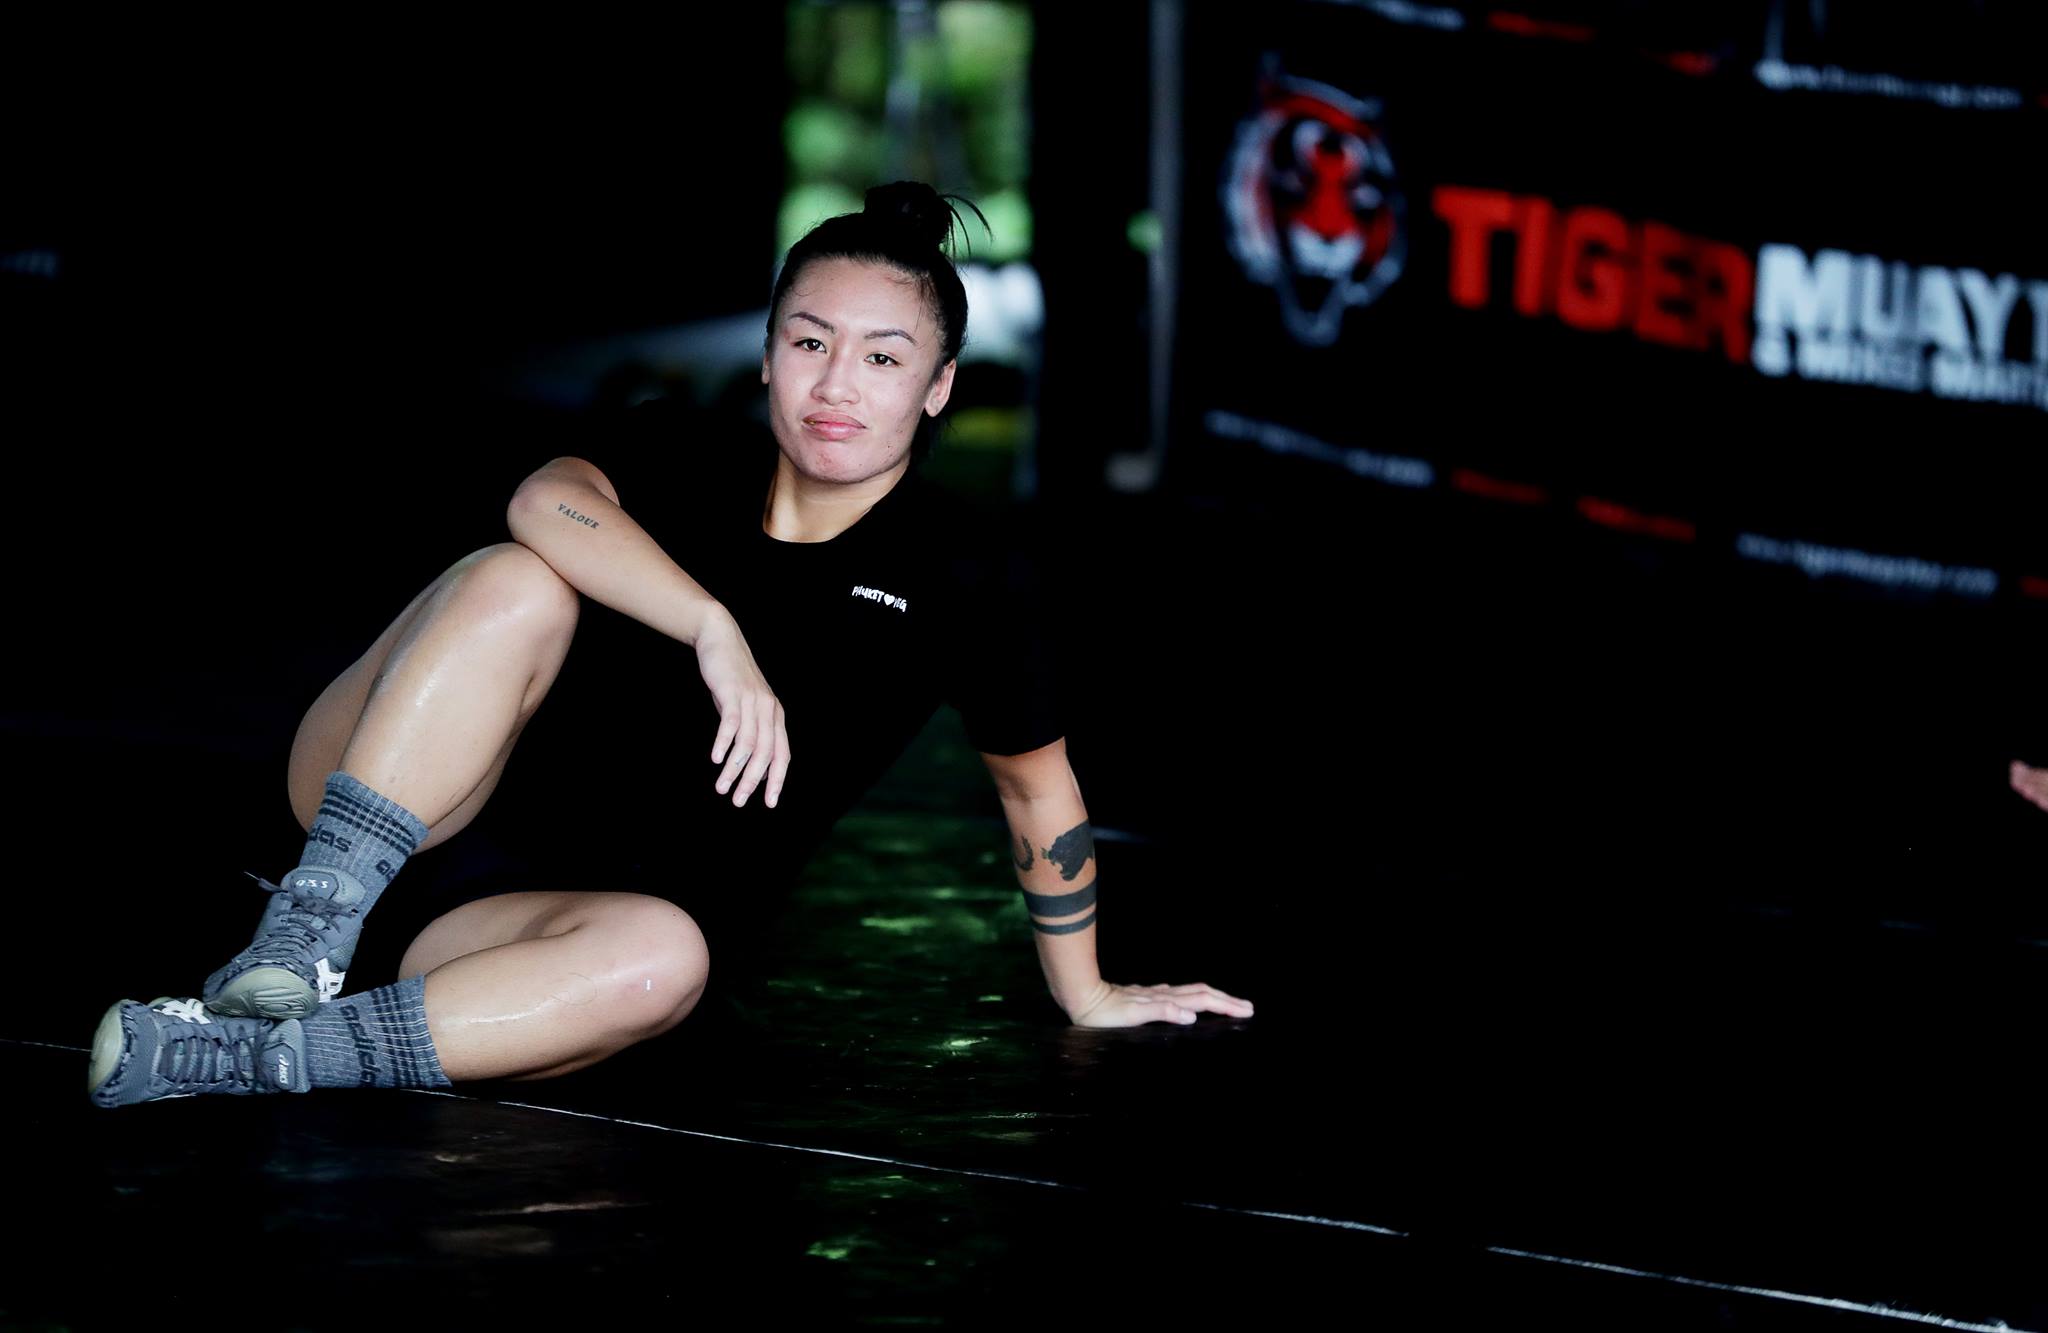 Day In The Life At Tiger Muay Thai 2th May 2018 Photo Gallery